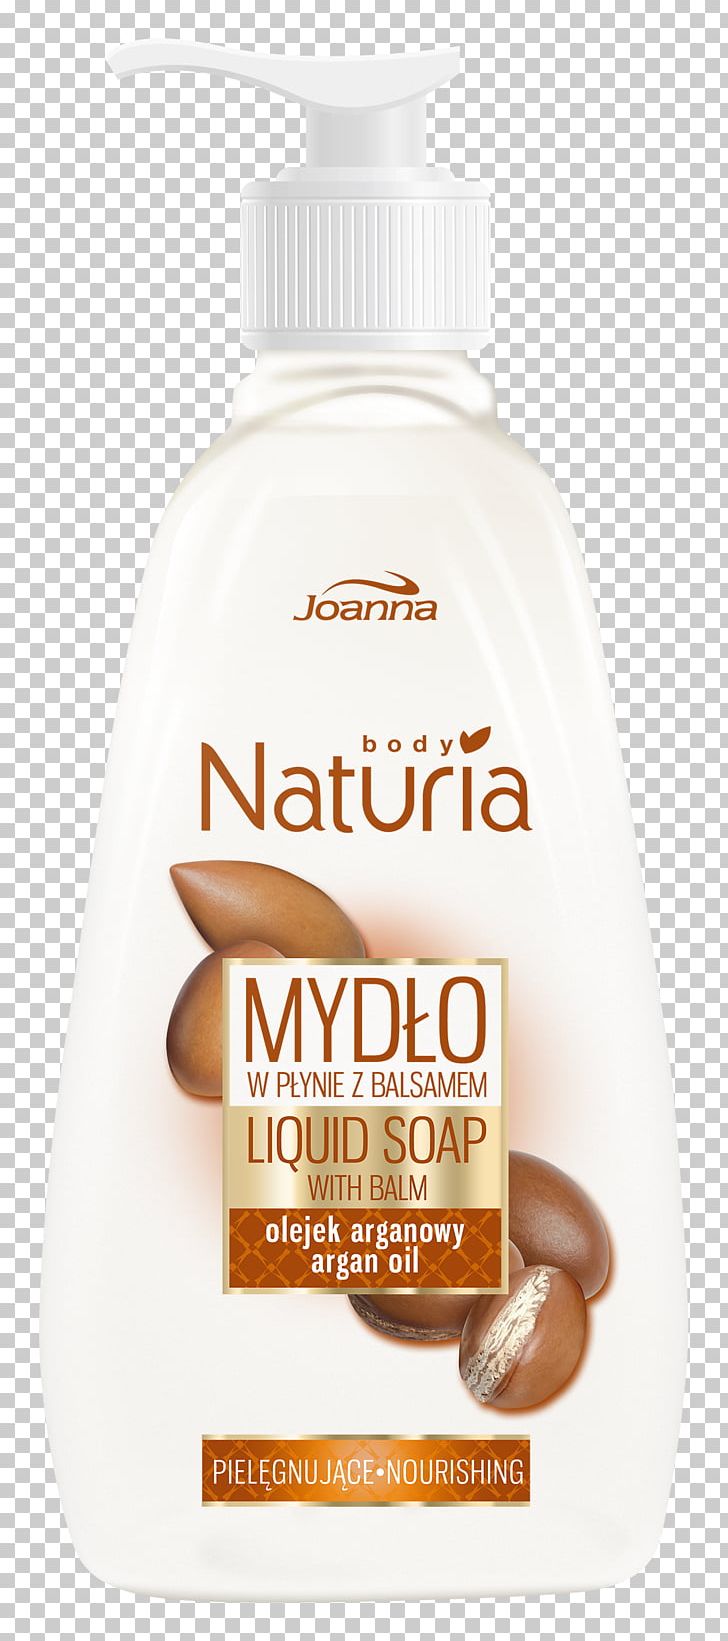 Lotion Olive Oil Liquid Cream Joanna Naturia PNG, Clipart, Argan, Argan Oil, Cream, Extract, Food Drinks Free PNG Download